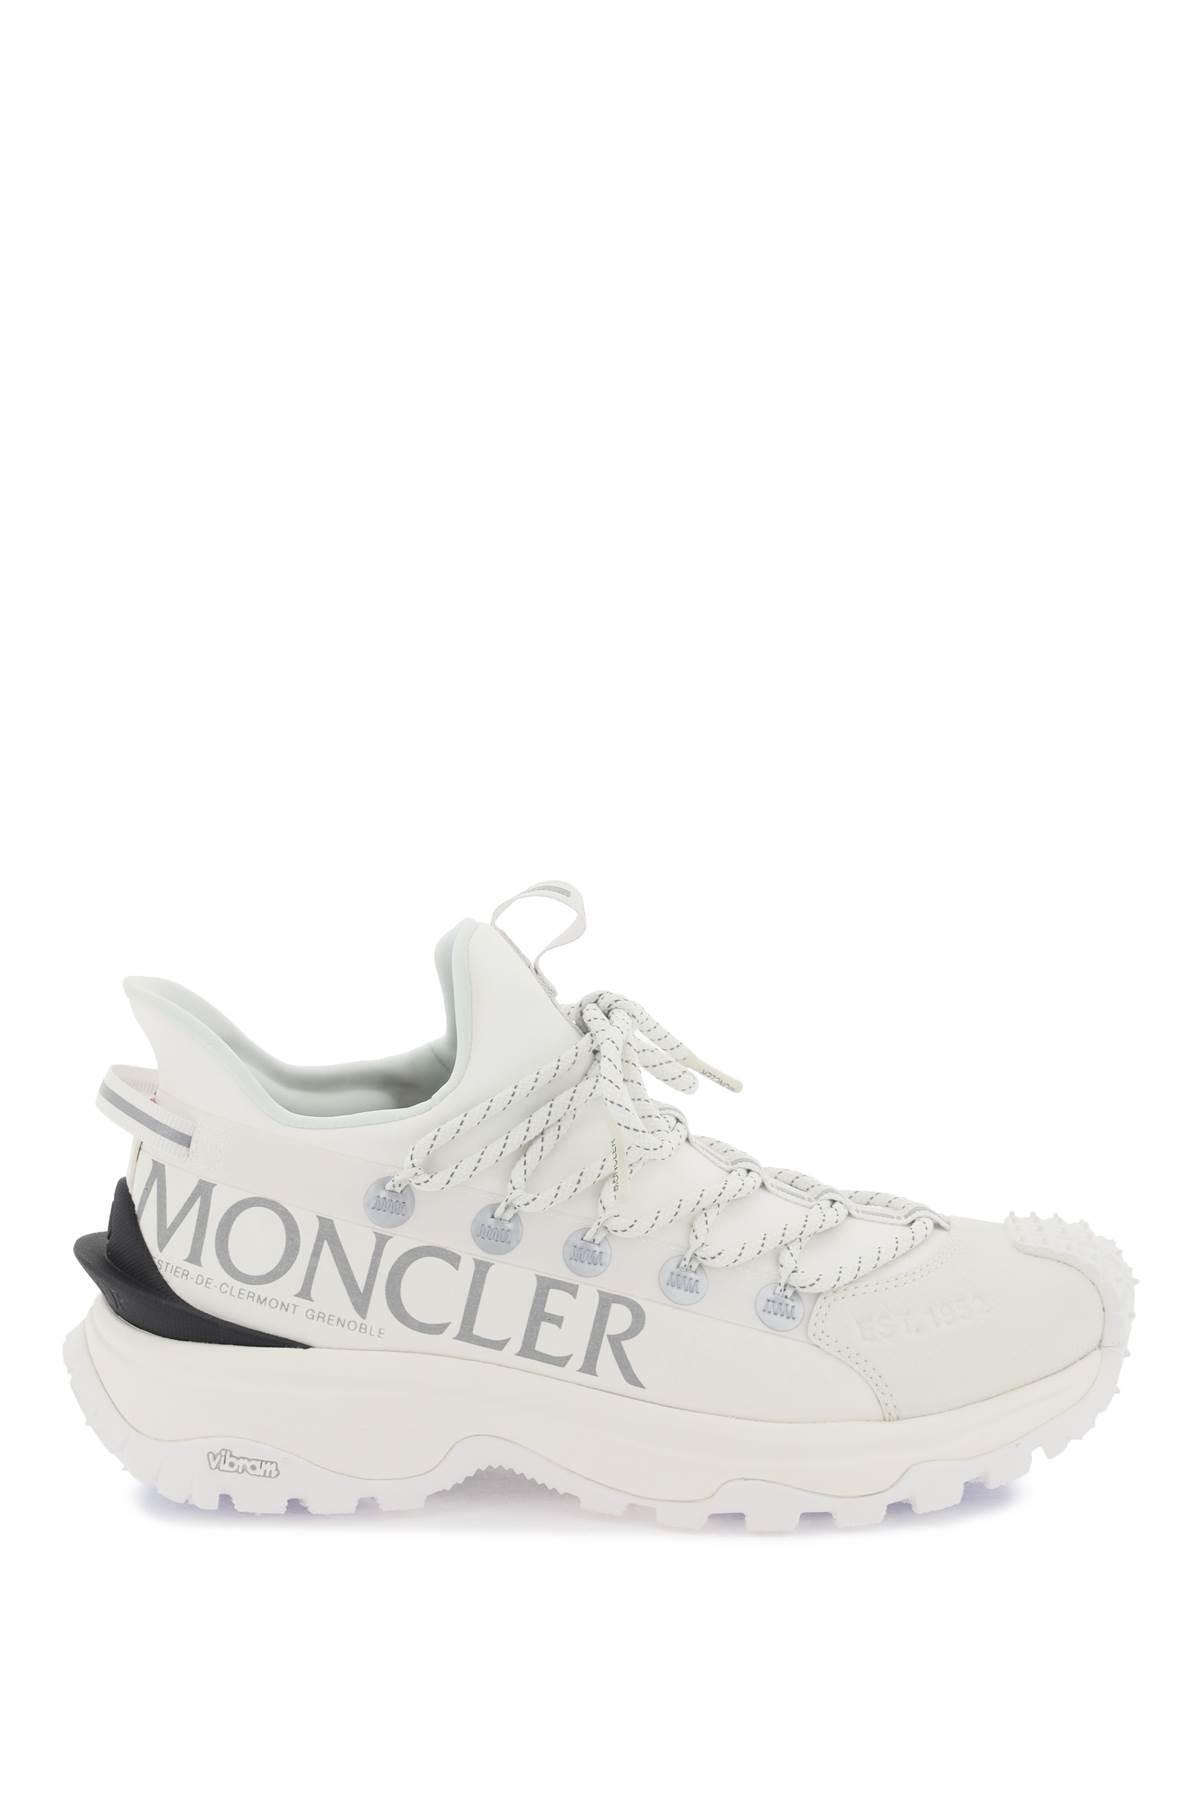 Moncler 'trailgrip Lite 2' Sneakers in White | Lyst